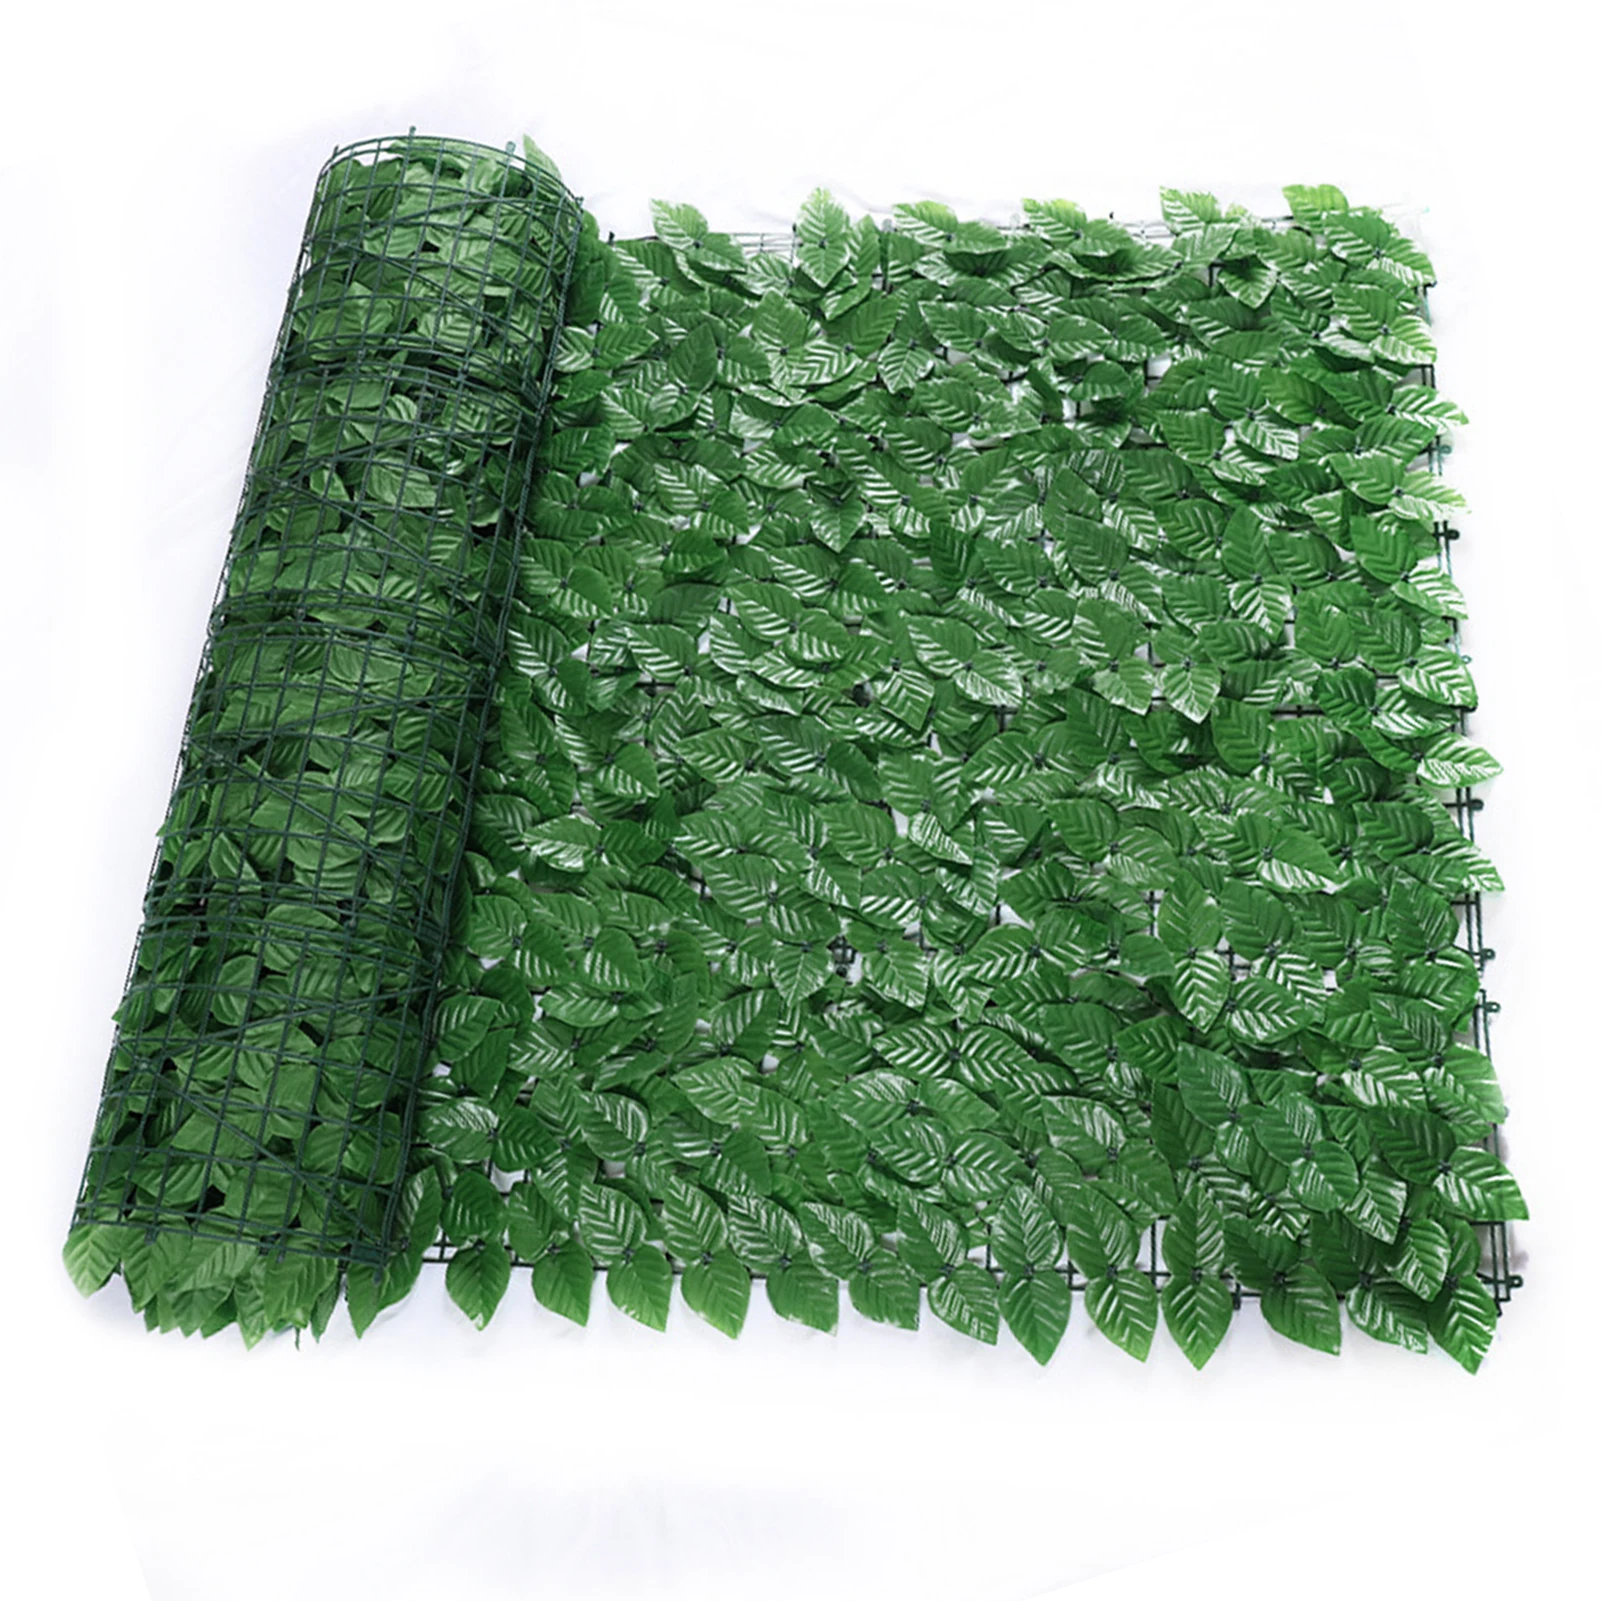 Artifical Ivy Privacy Fence Screen Expandable Faux Ivy Vine Leaf Grass Wall for Outdoor Indoor Garden Balcony Decoration 50X50cm